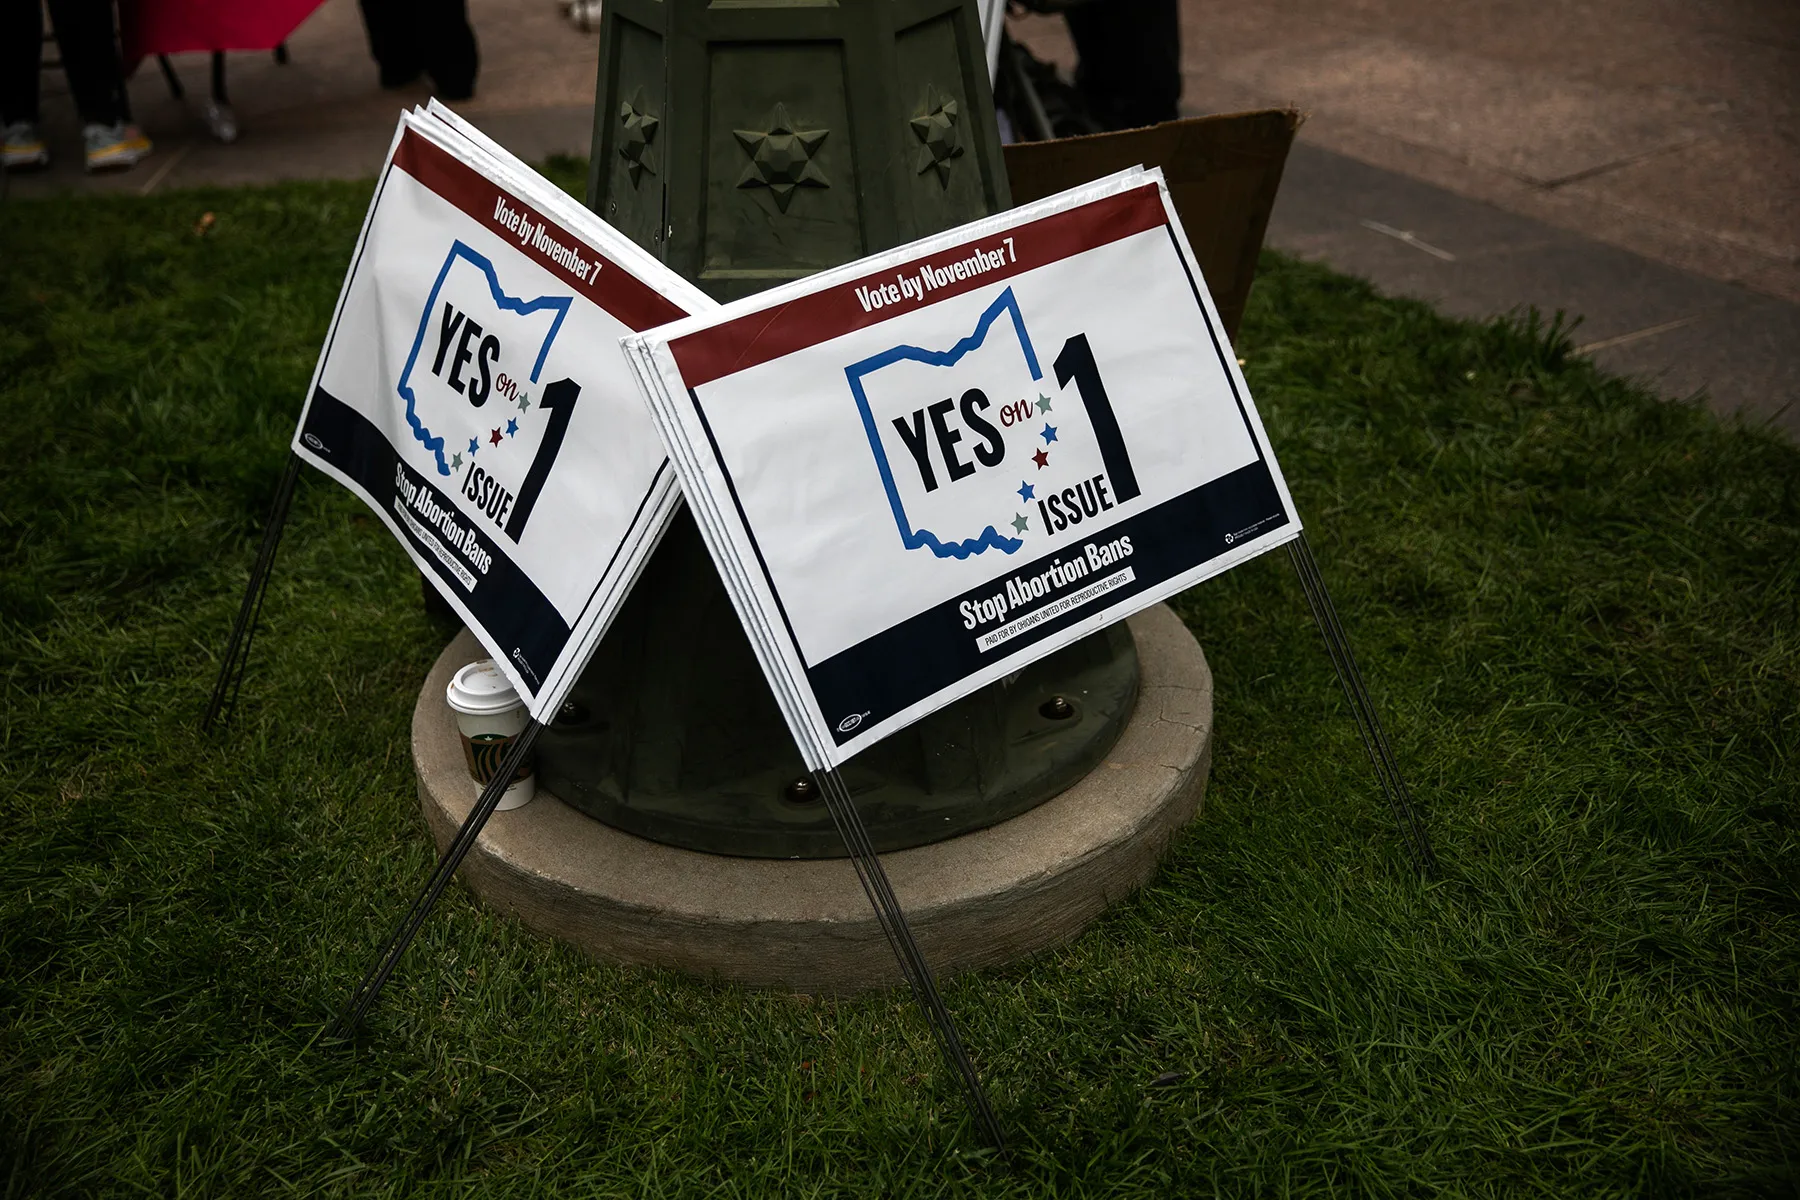 Signs encourage voters to vote yes on Issue 1 this November.